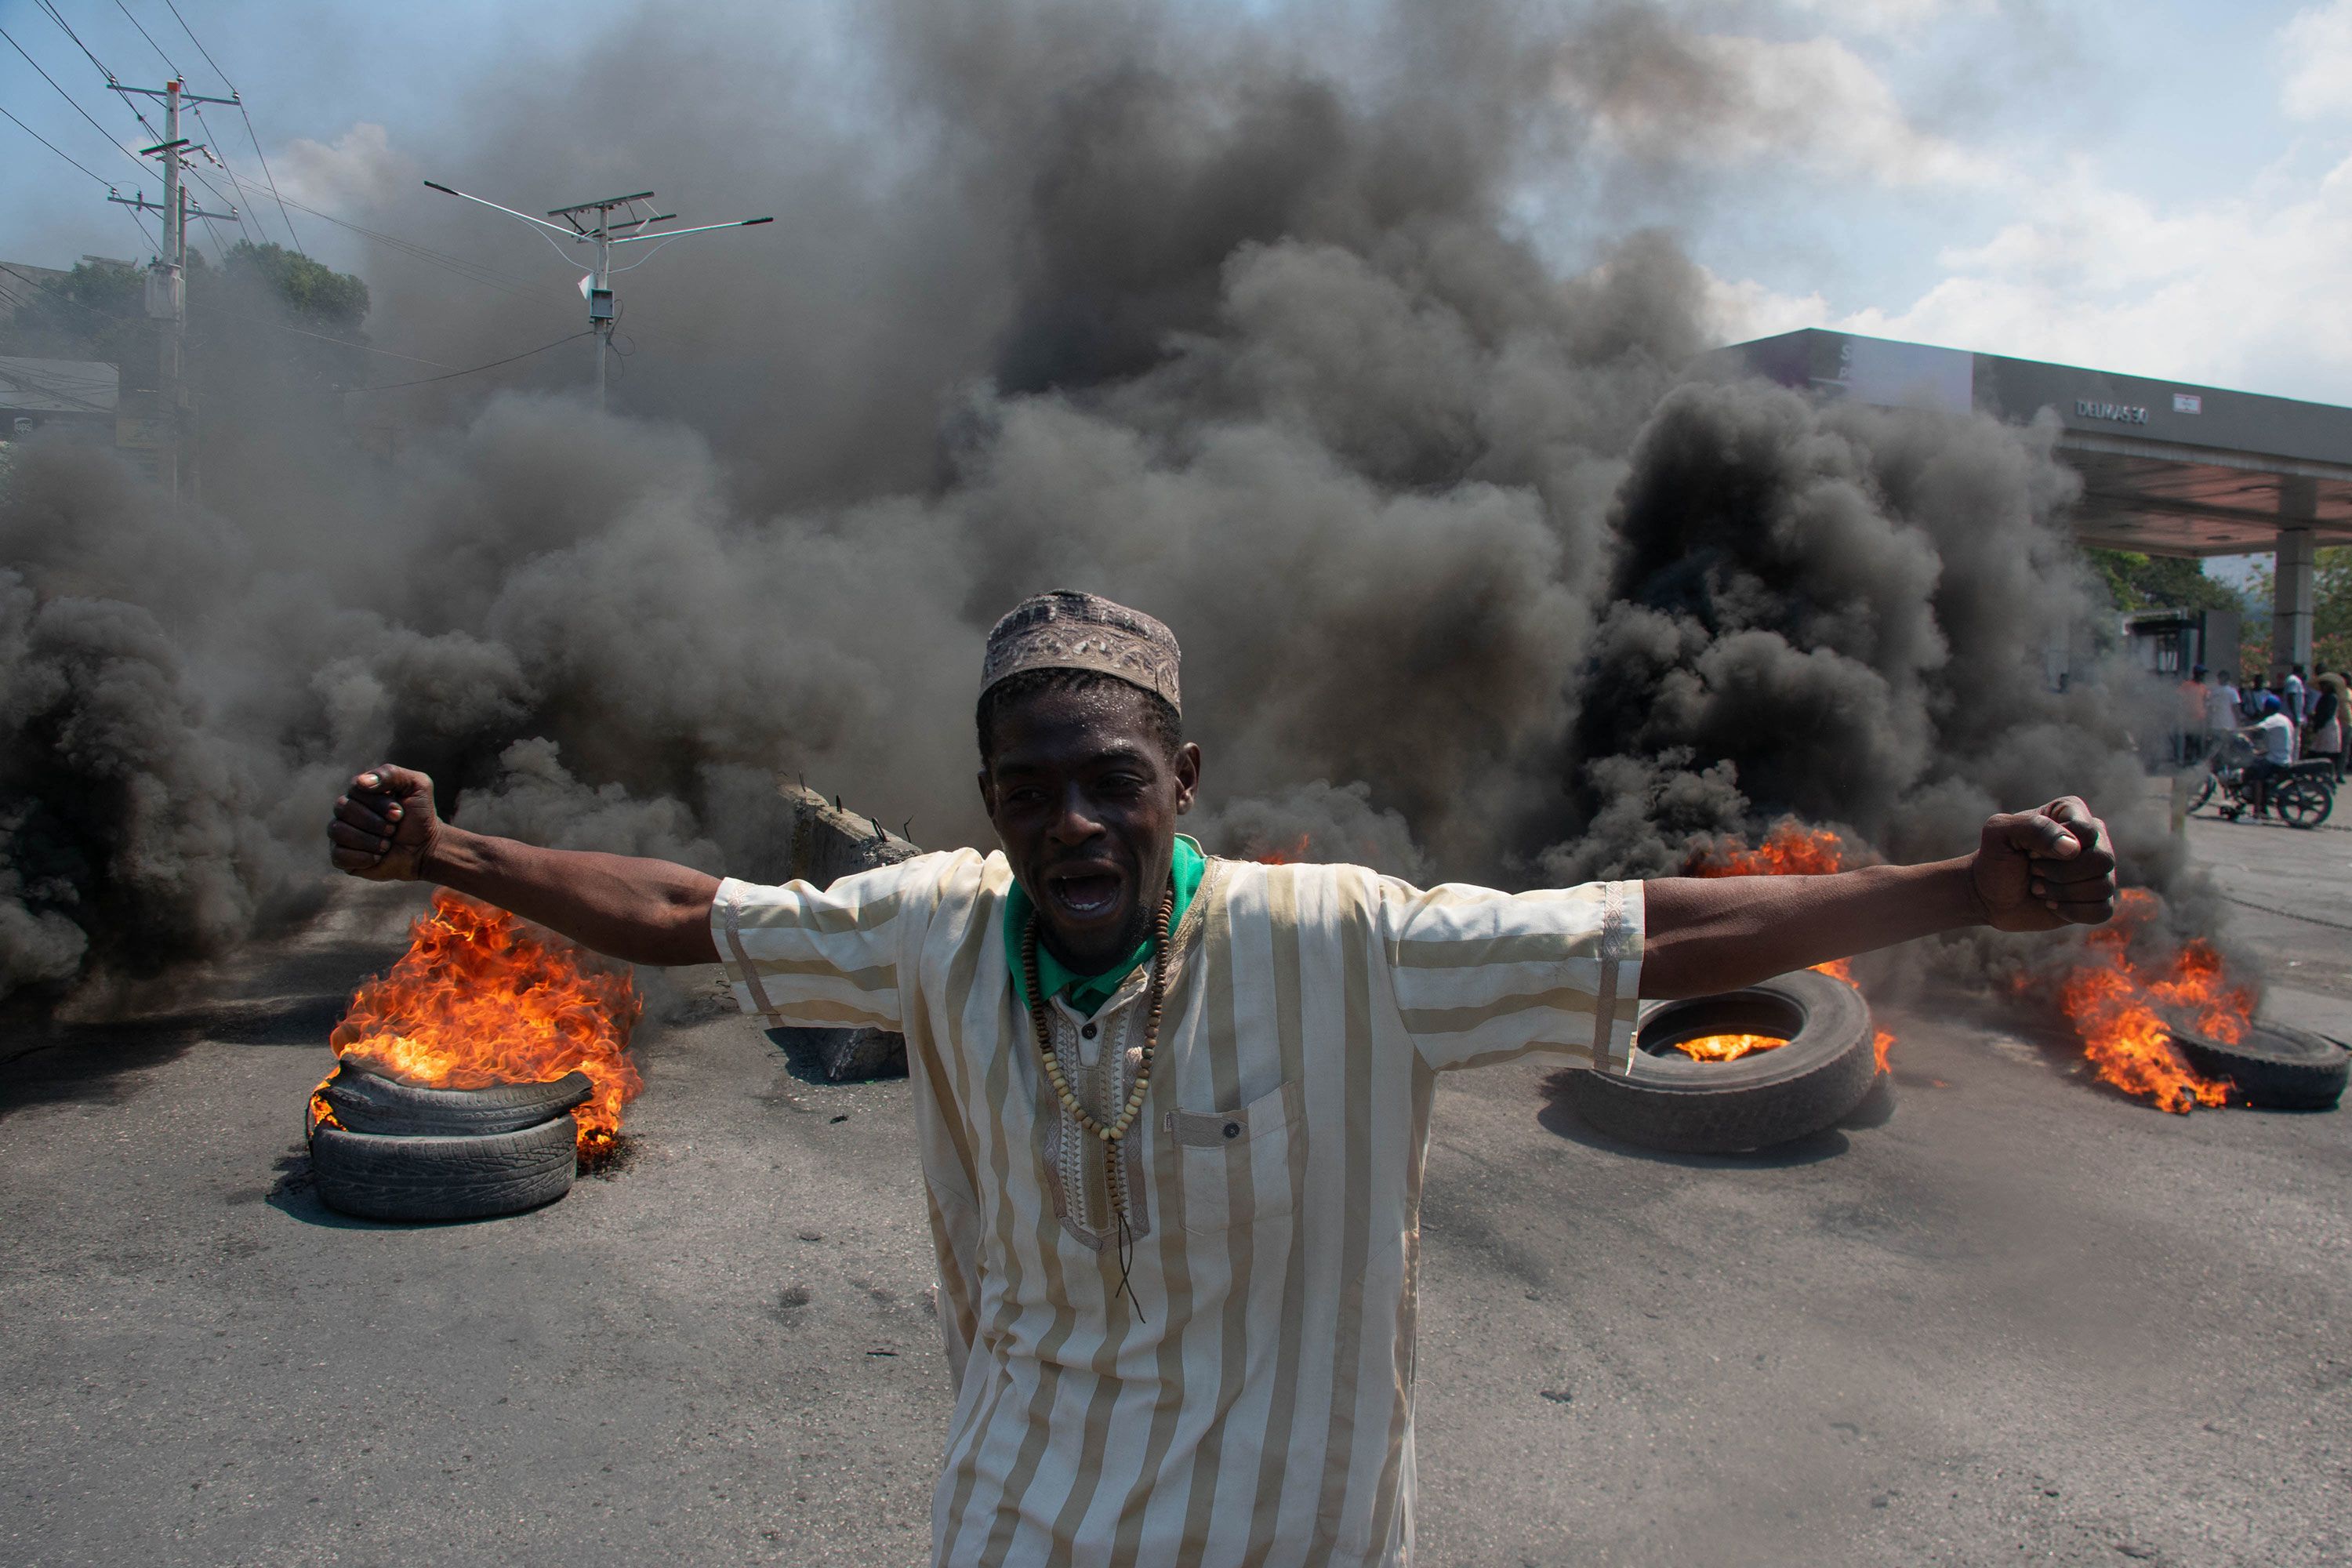 A protester reacts while tires burn in a street in Port-au-Prince, Haiti, on Tuesday, March 12.